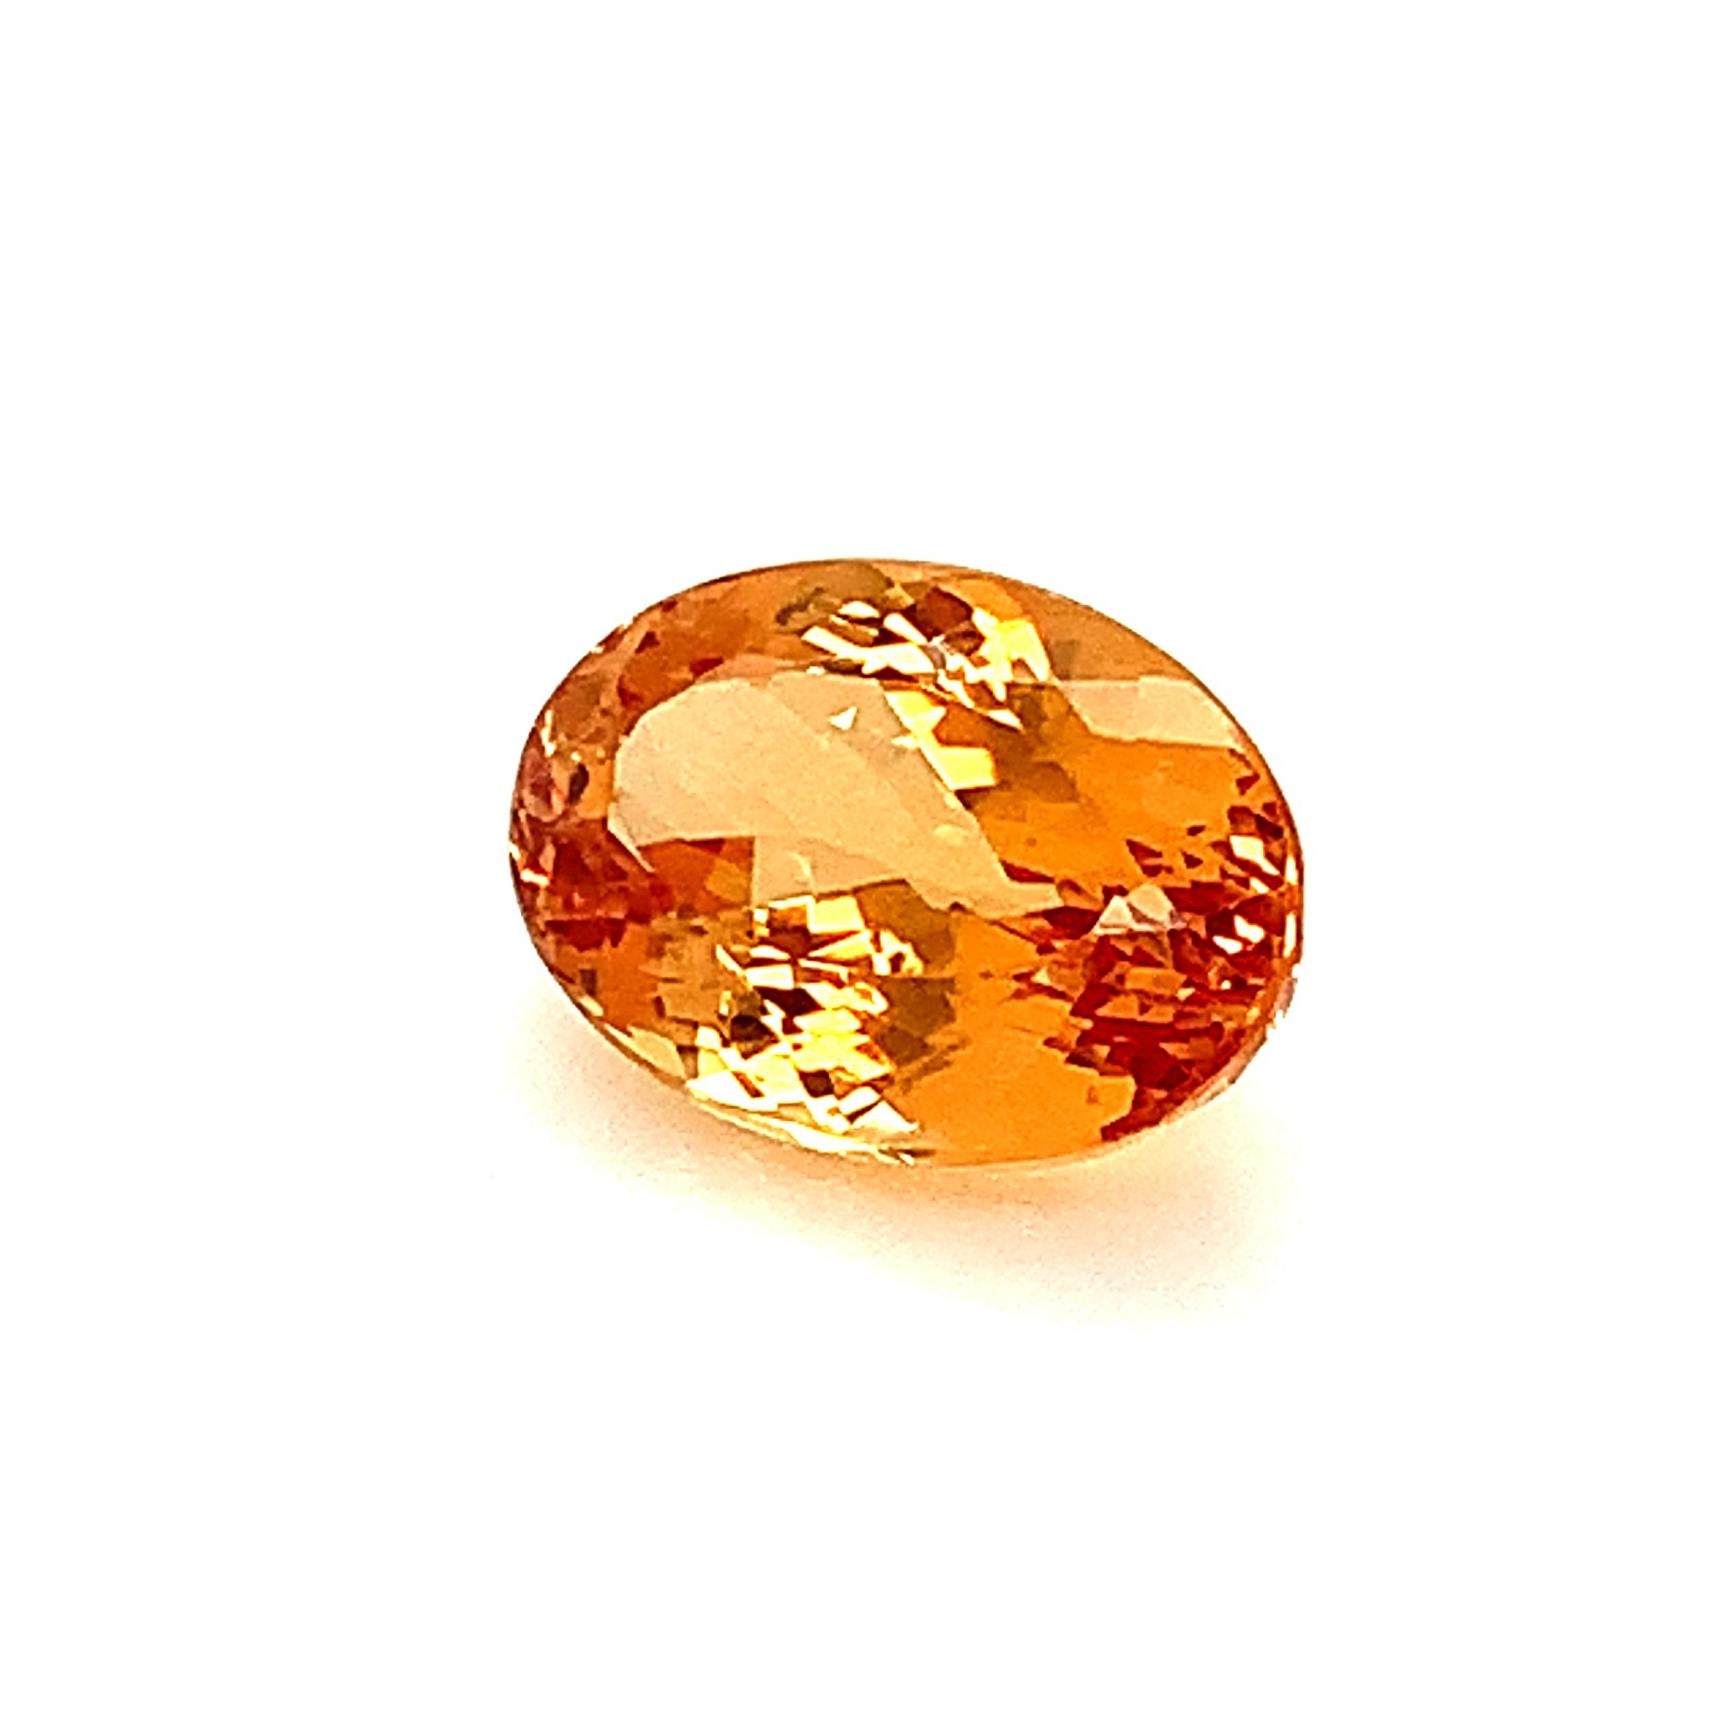 Oval Cut 7.16 Carat Precious Imperial Topaz Oval, Unset Loose Gemstone For Sale